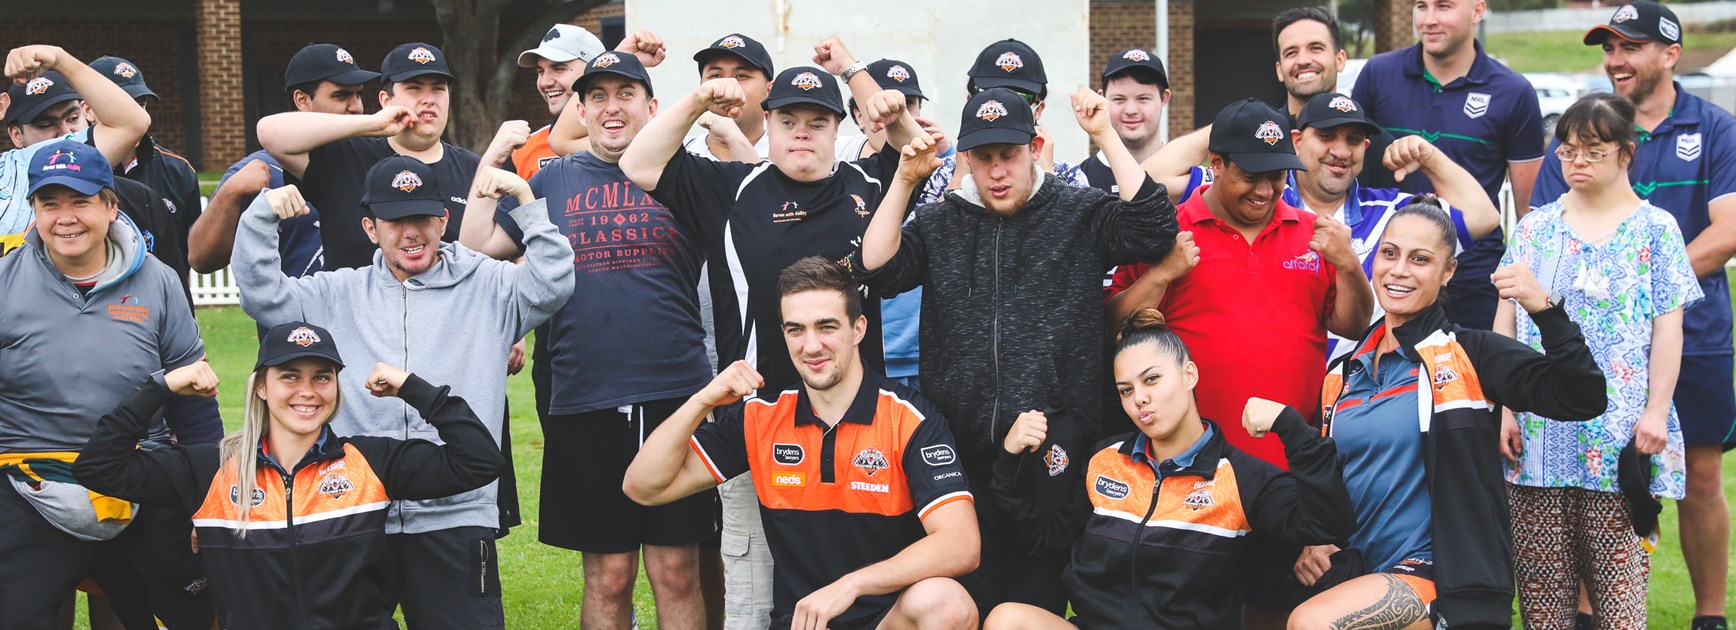 Wests Tigers celebrate International Day of People with Disability